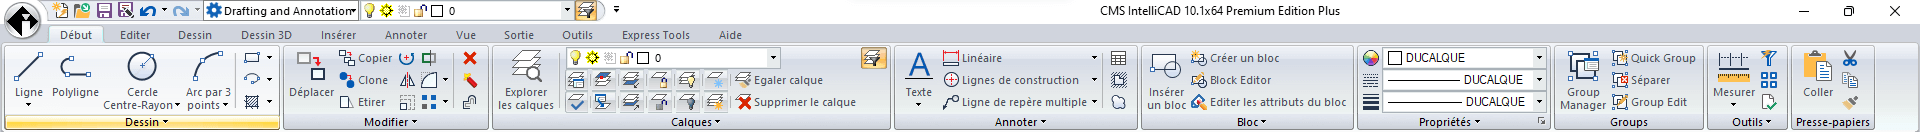 CMS IntelliCAD French user interface